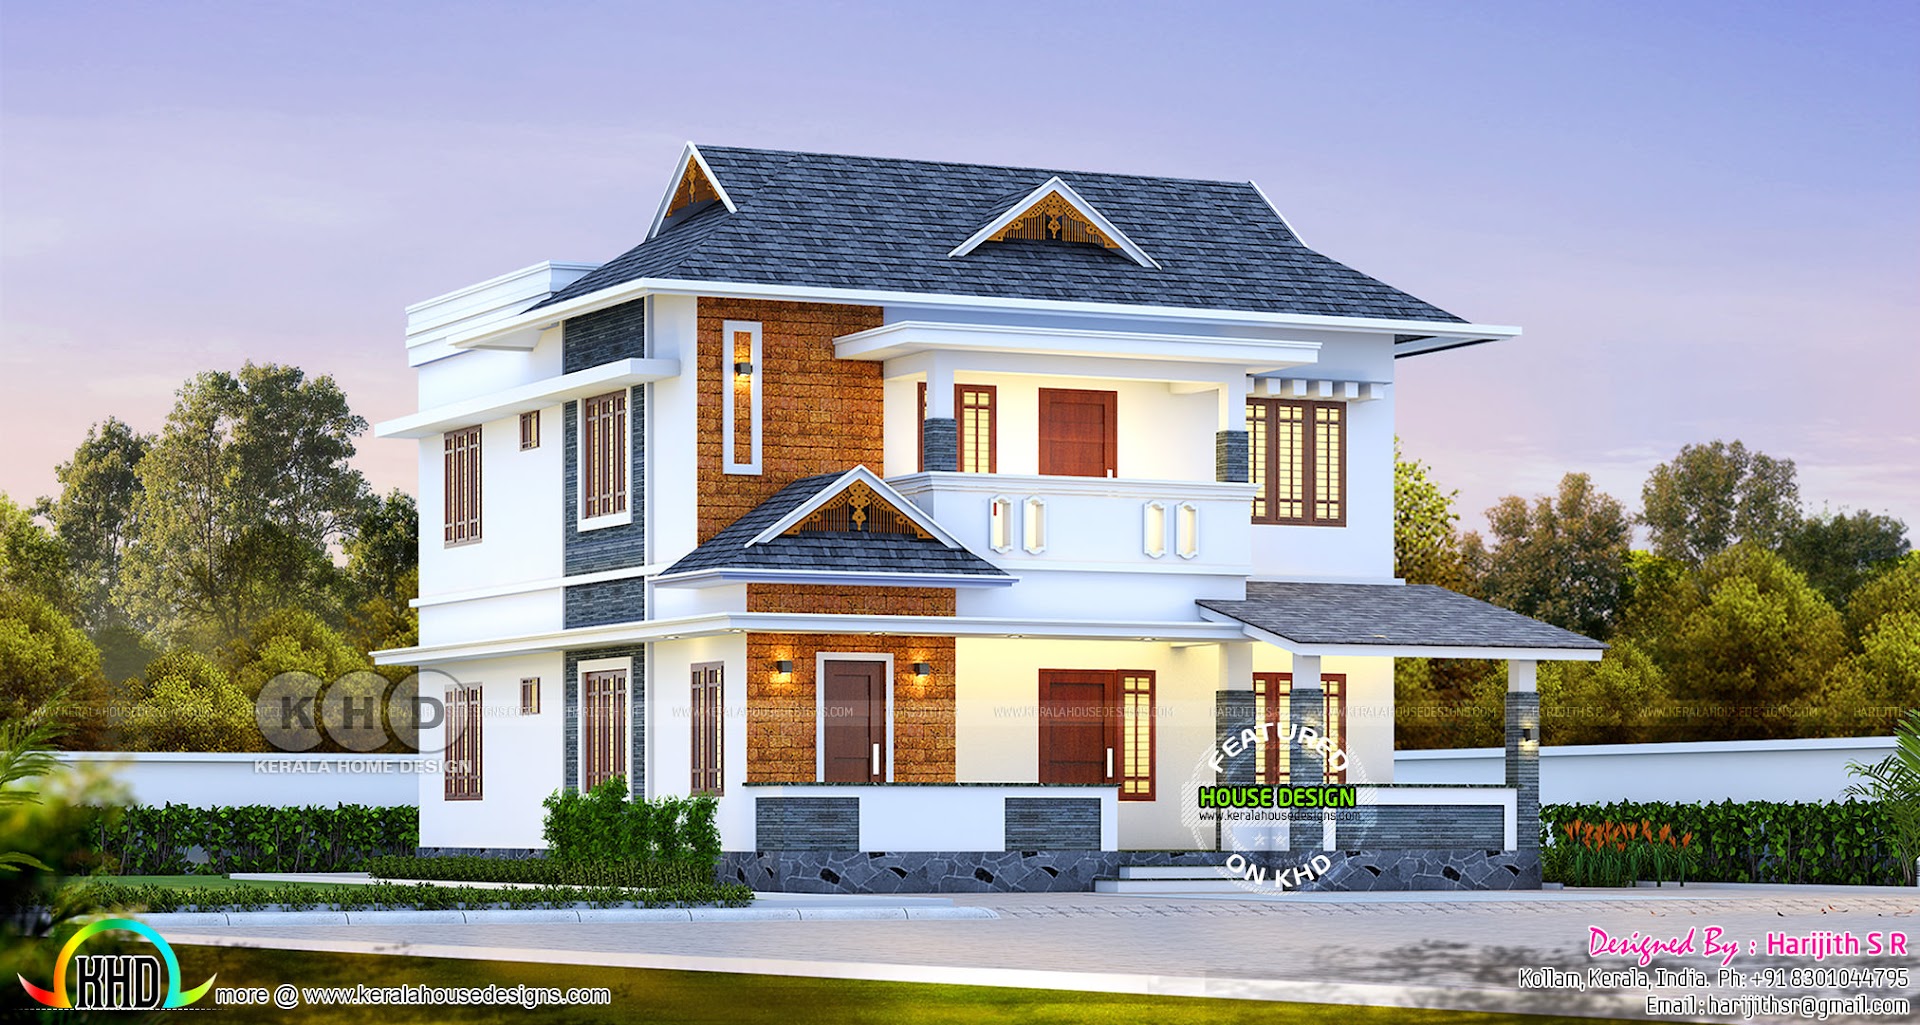 2024 sqft 4 bedroom modern sloping roof home Kerala Home Design and